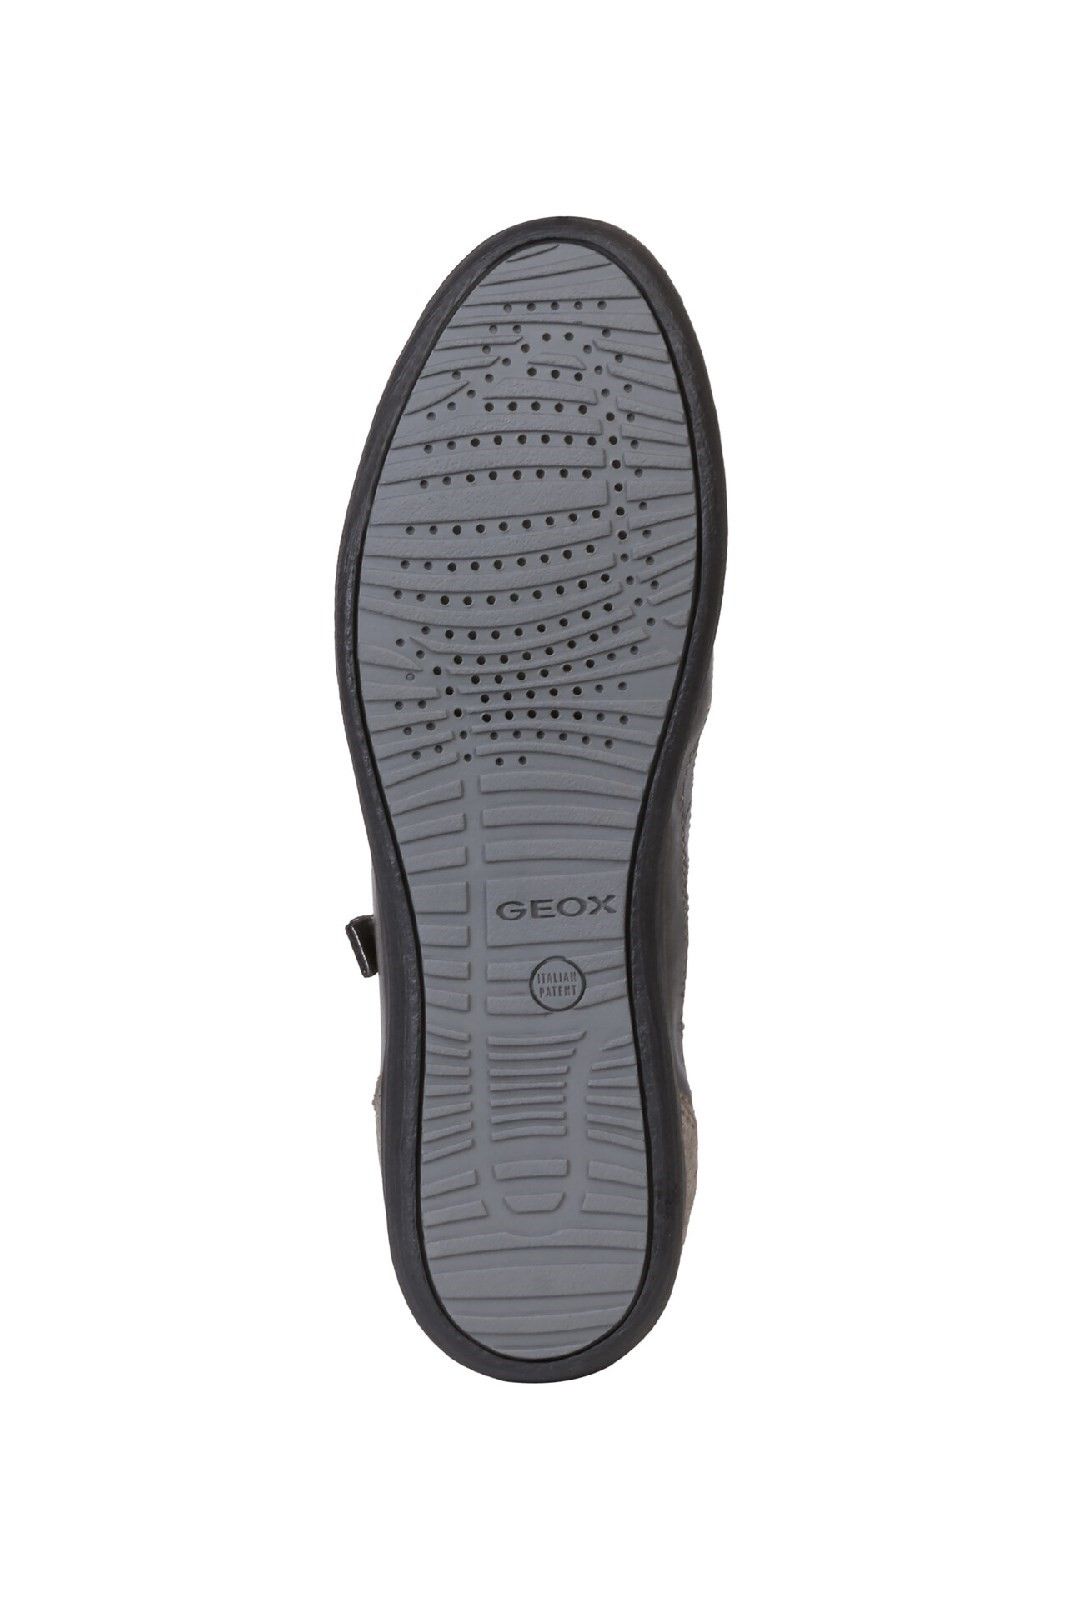 Evergreen Style, Easy-To-Wear Low-Cut Sneakers With Trendy Details For A Contemporary Look. Wellbeing Is Assured Thanks To The Geox Patented Perforated Sole That Provides Maximum Breathability And Comfort.Evergreen. 
Easy To Put On. 
Anti-Slip Outsole.